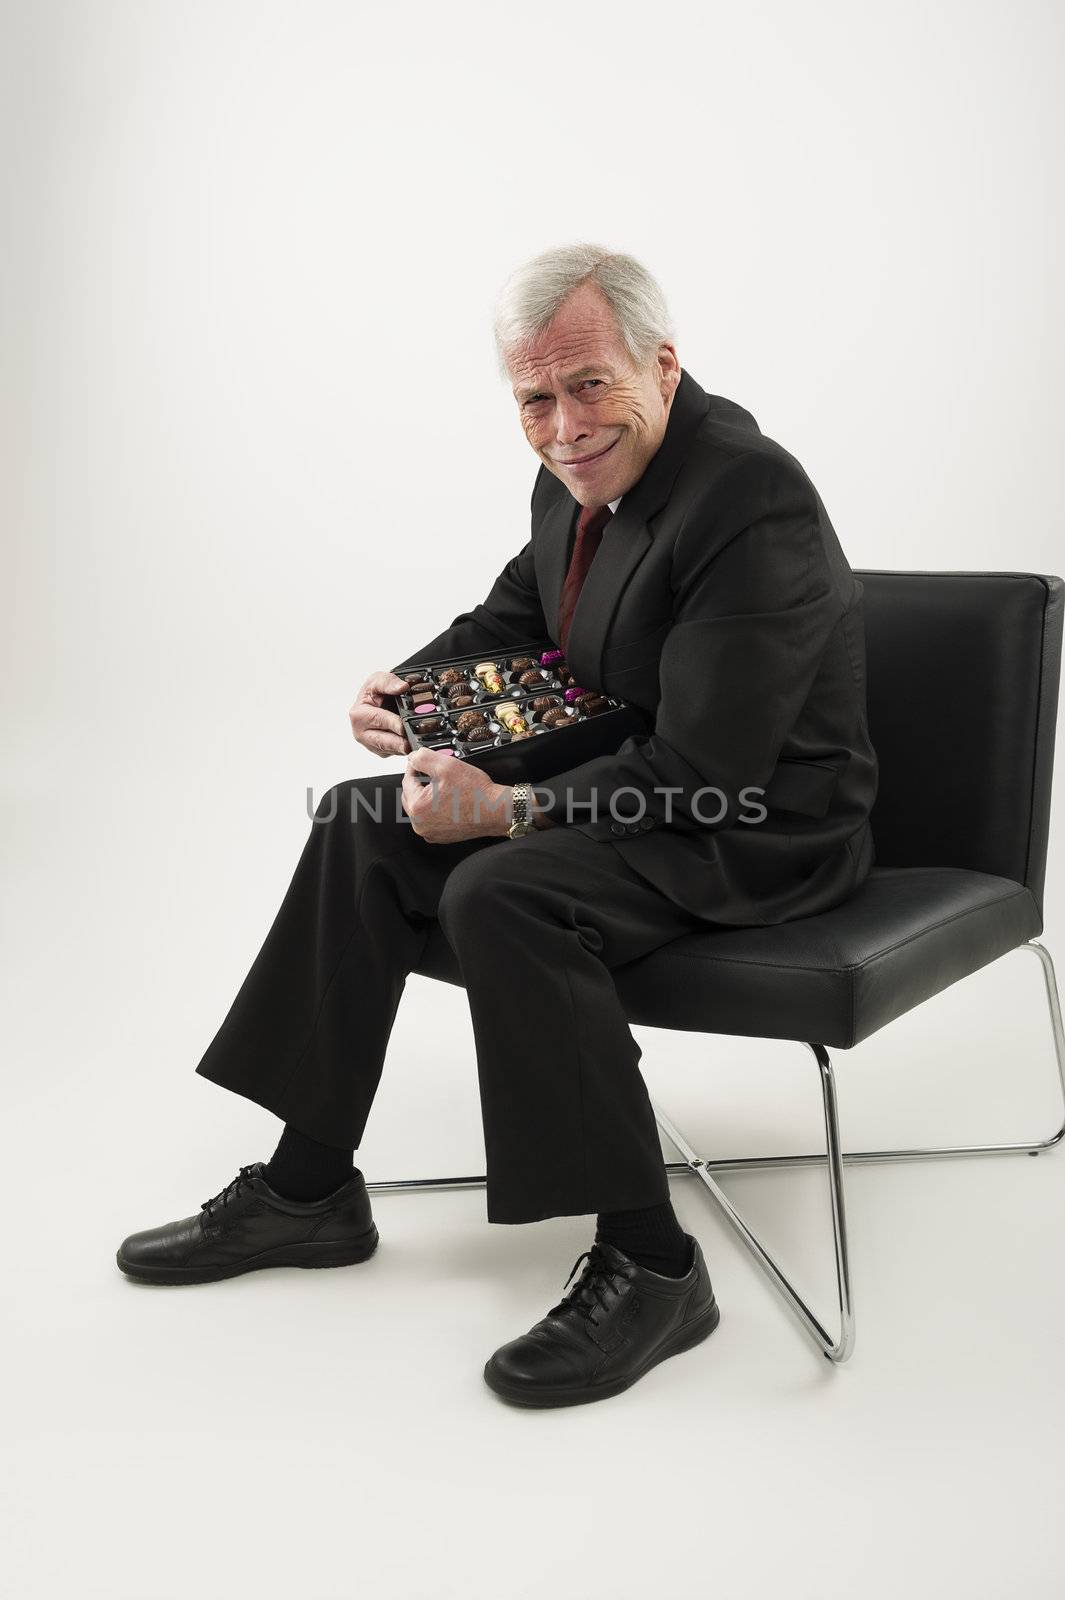 Studio portrait over white of an old man in a suit, sitting in a chair and protecting a large box of chocolates from anyone who may wish to share